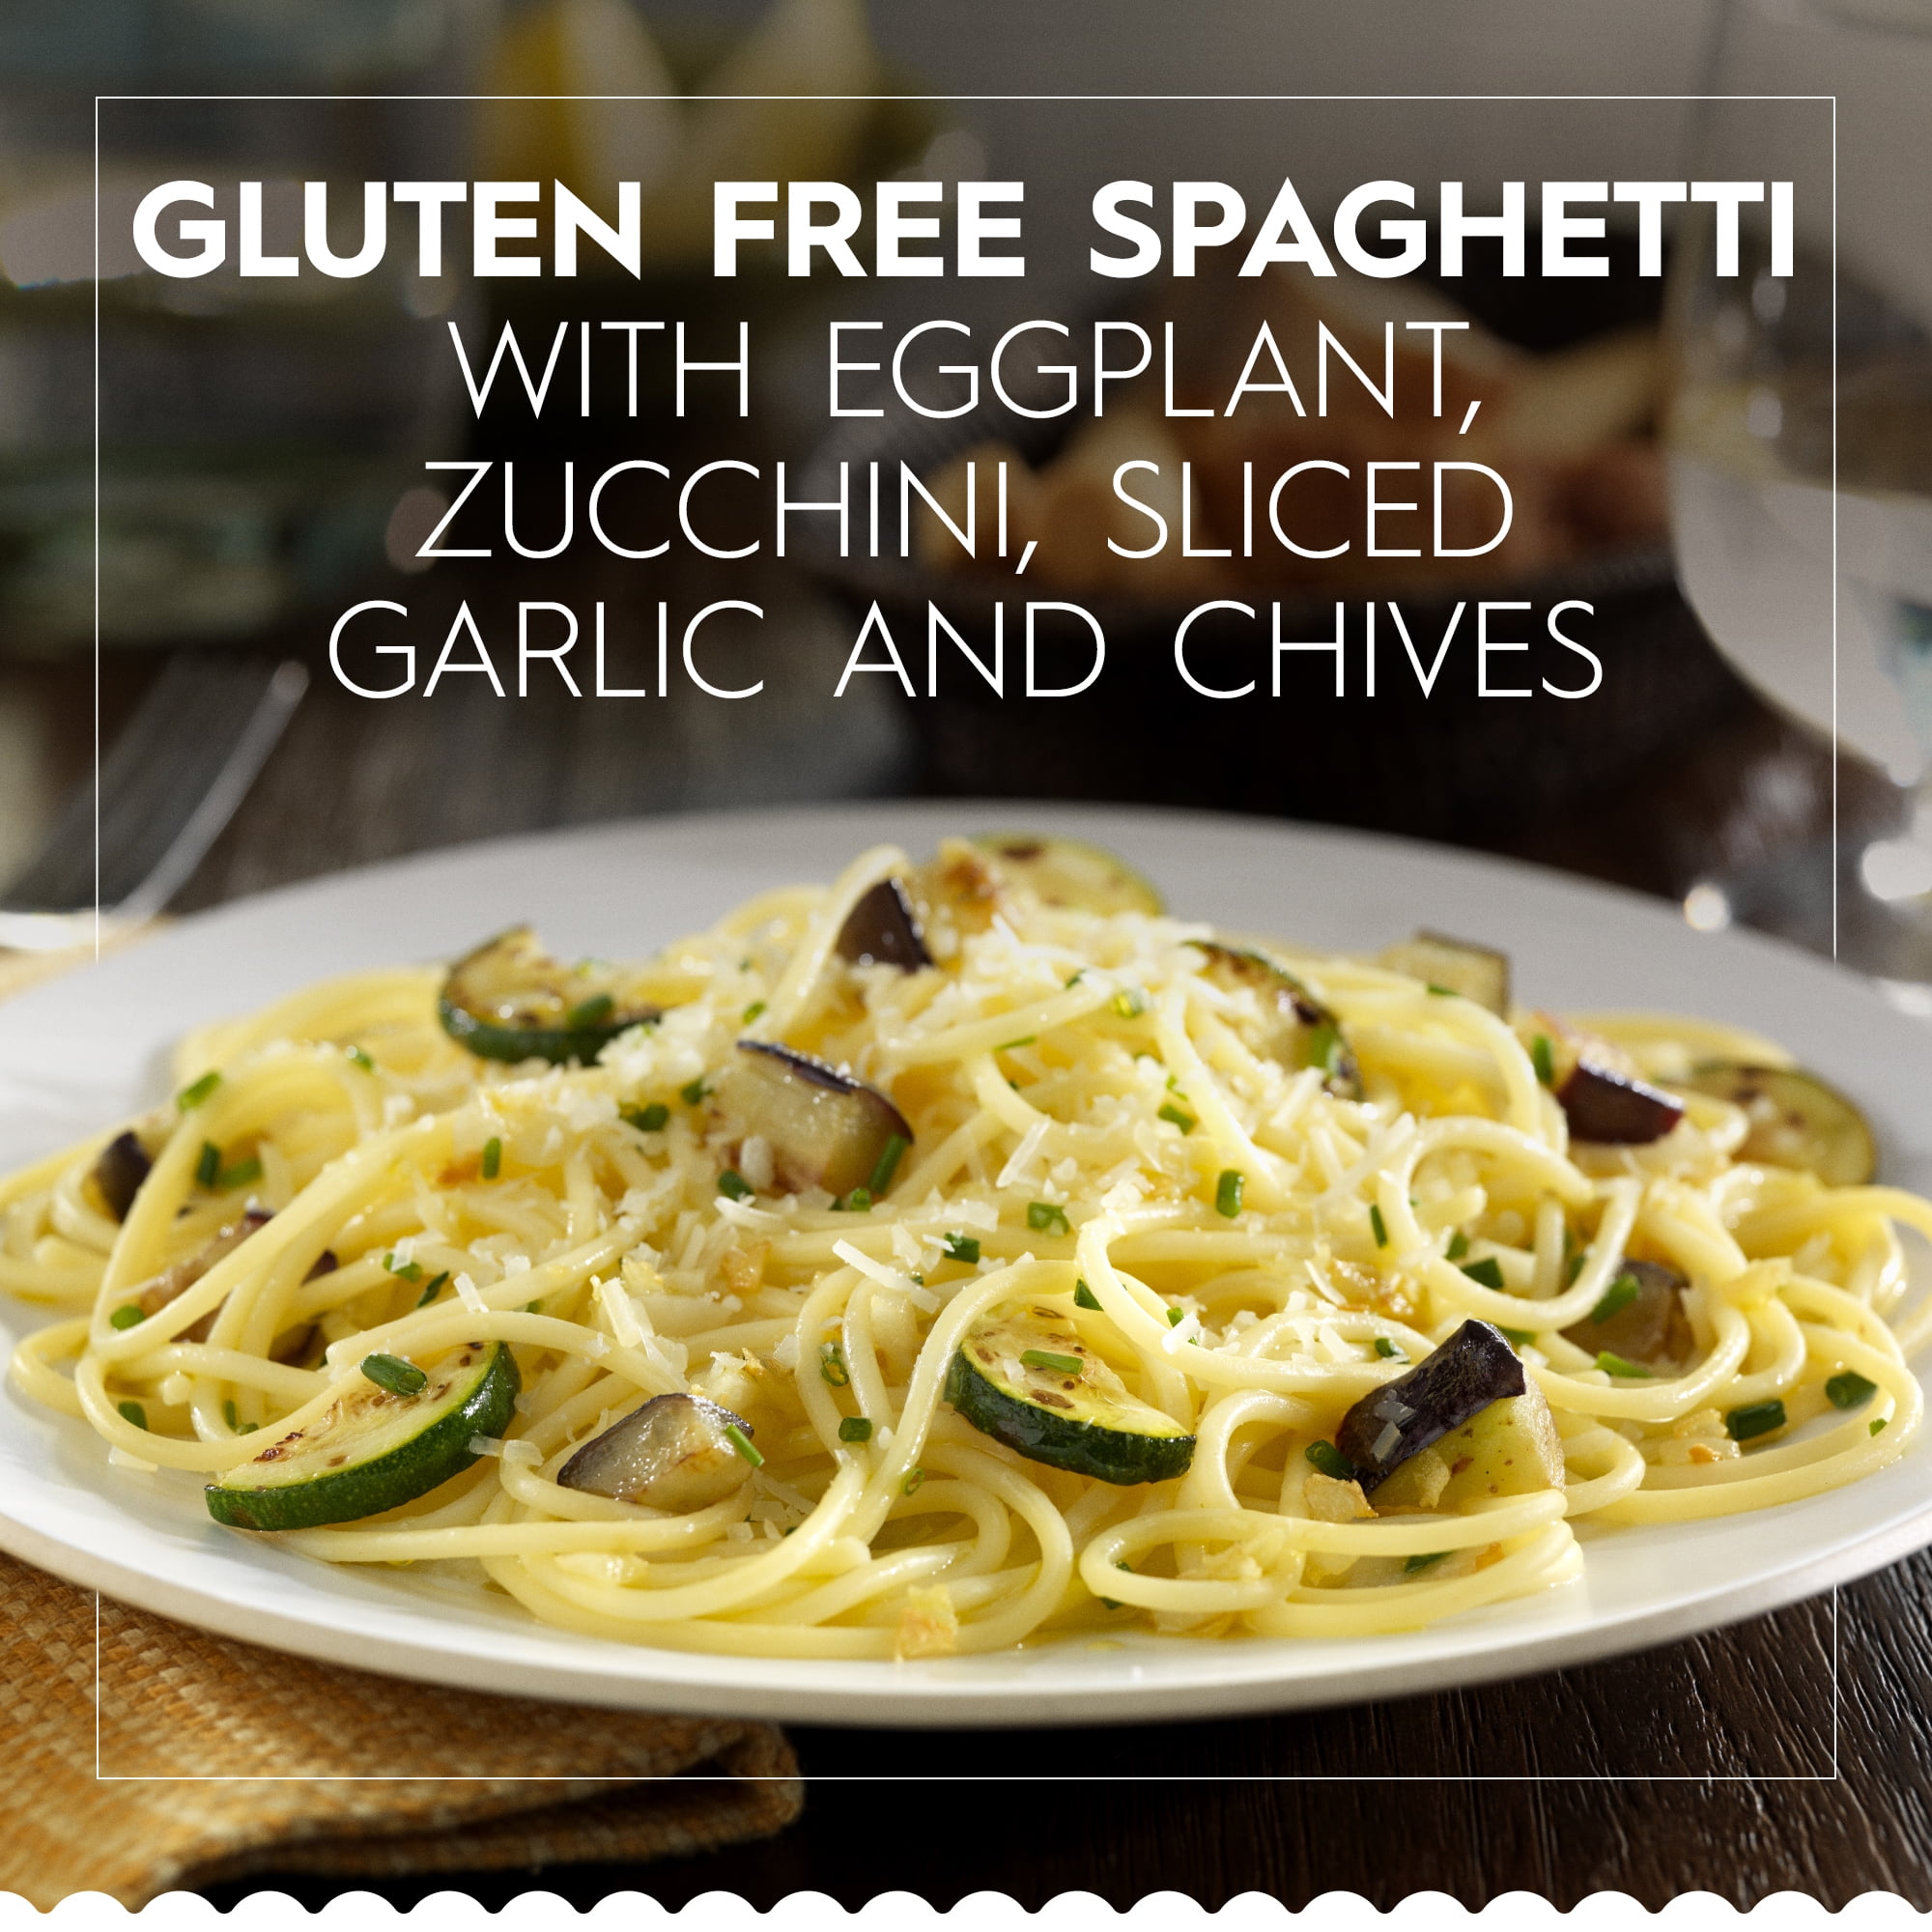 Barilla Gluten Free Penne and Spaghetti Variety Pack, 4 pk.